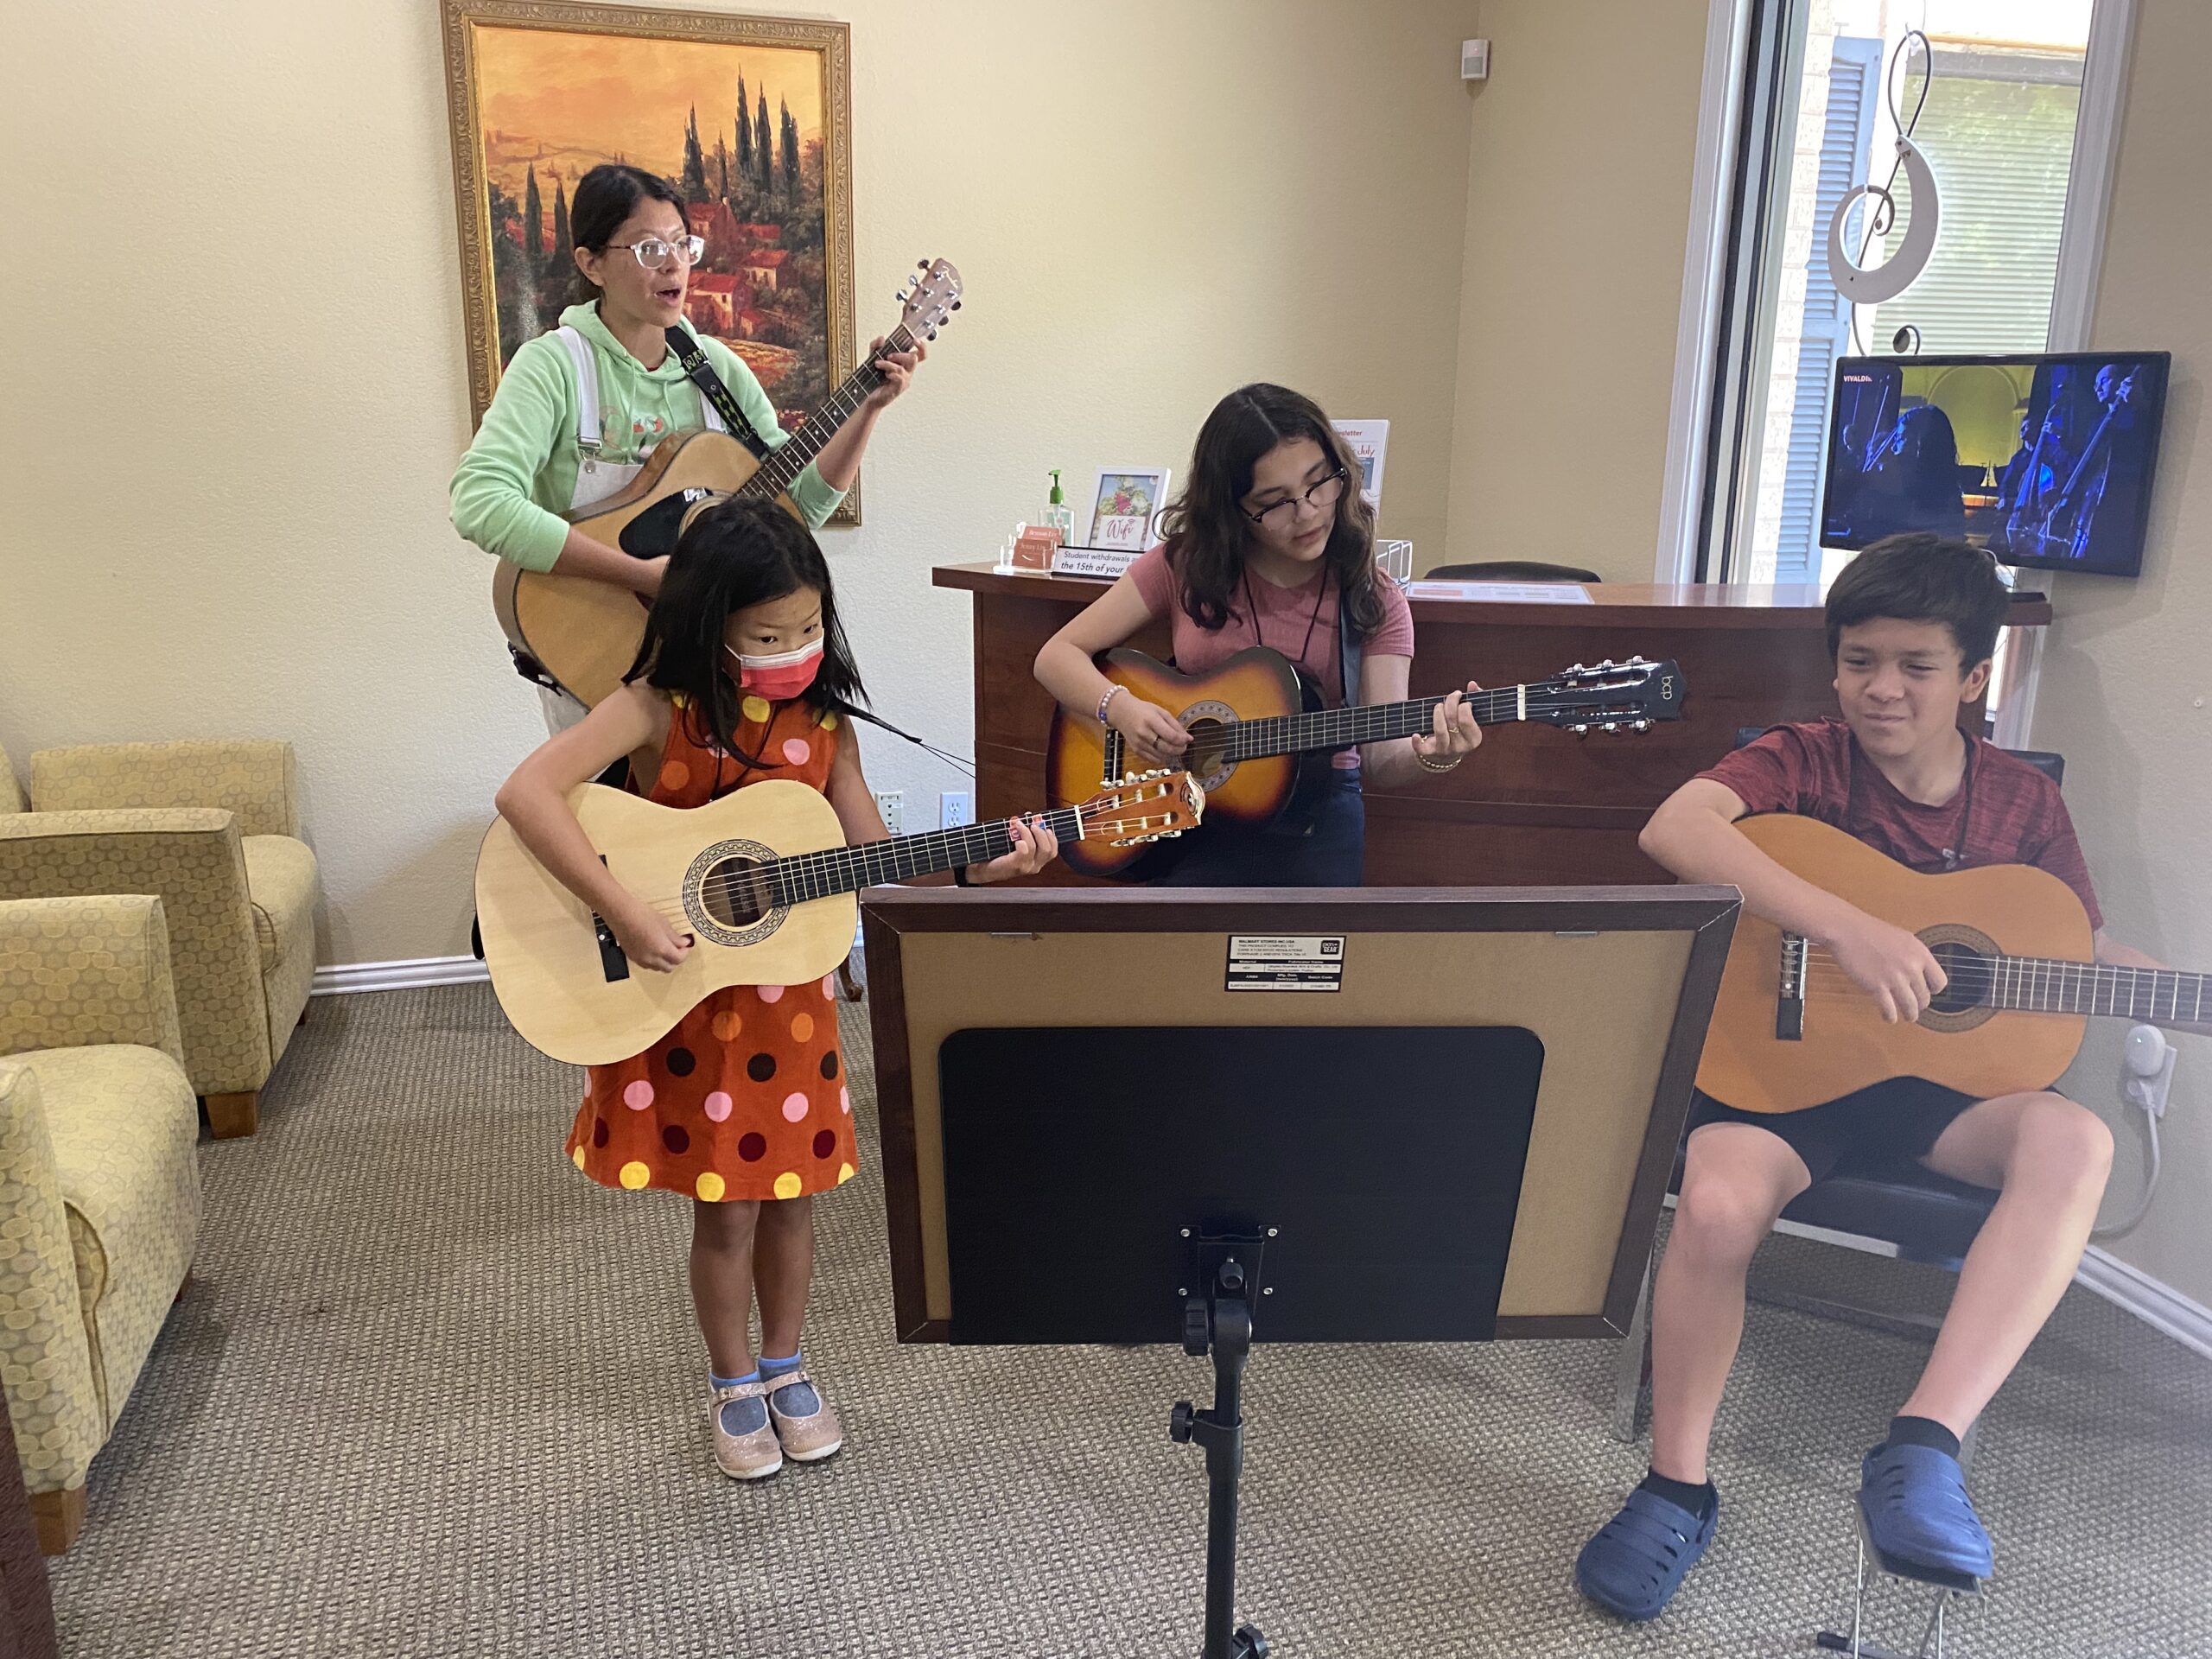 Flower Mound Music Academy offers private lessons in piano, voice, violin, viola, cello and guitar to students of all ages and levels in Flower Mound, Lewisville, Denton, Argyle, Keller area. Both in-person and virtual lessons are available.